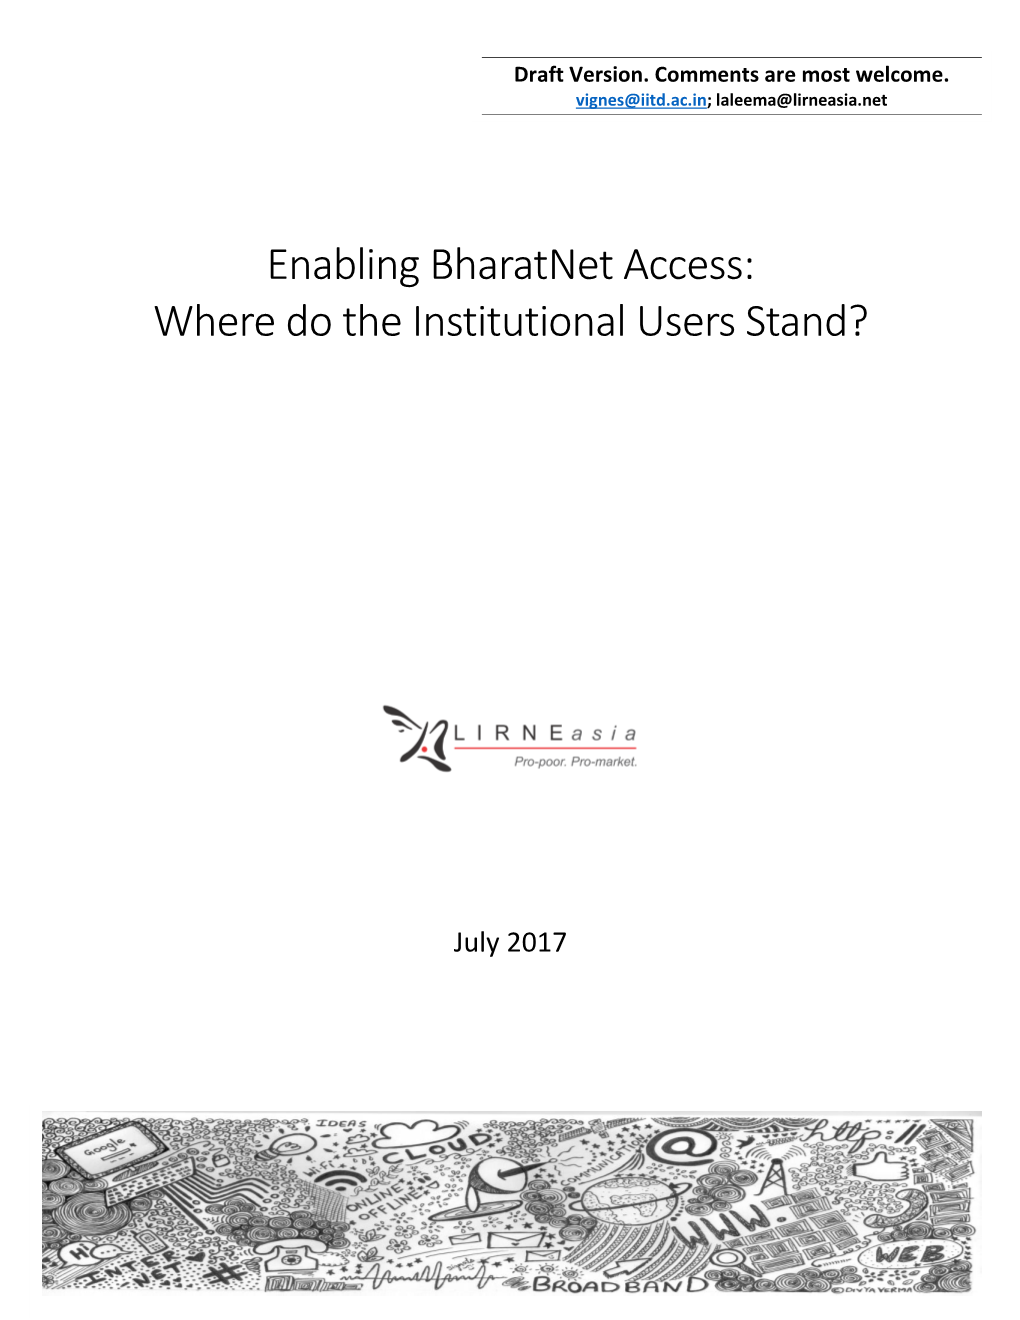 Enabling Bharatnet Access: Where Do the Institutional Users Stand?